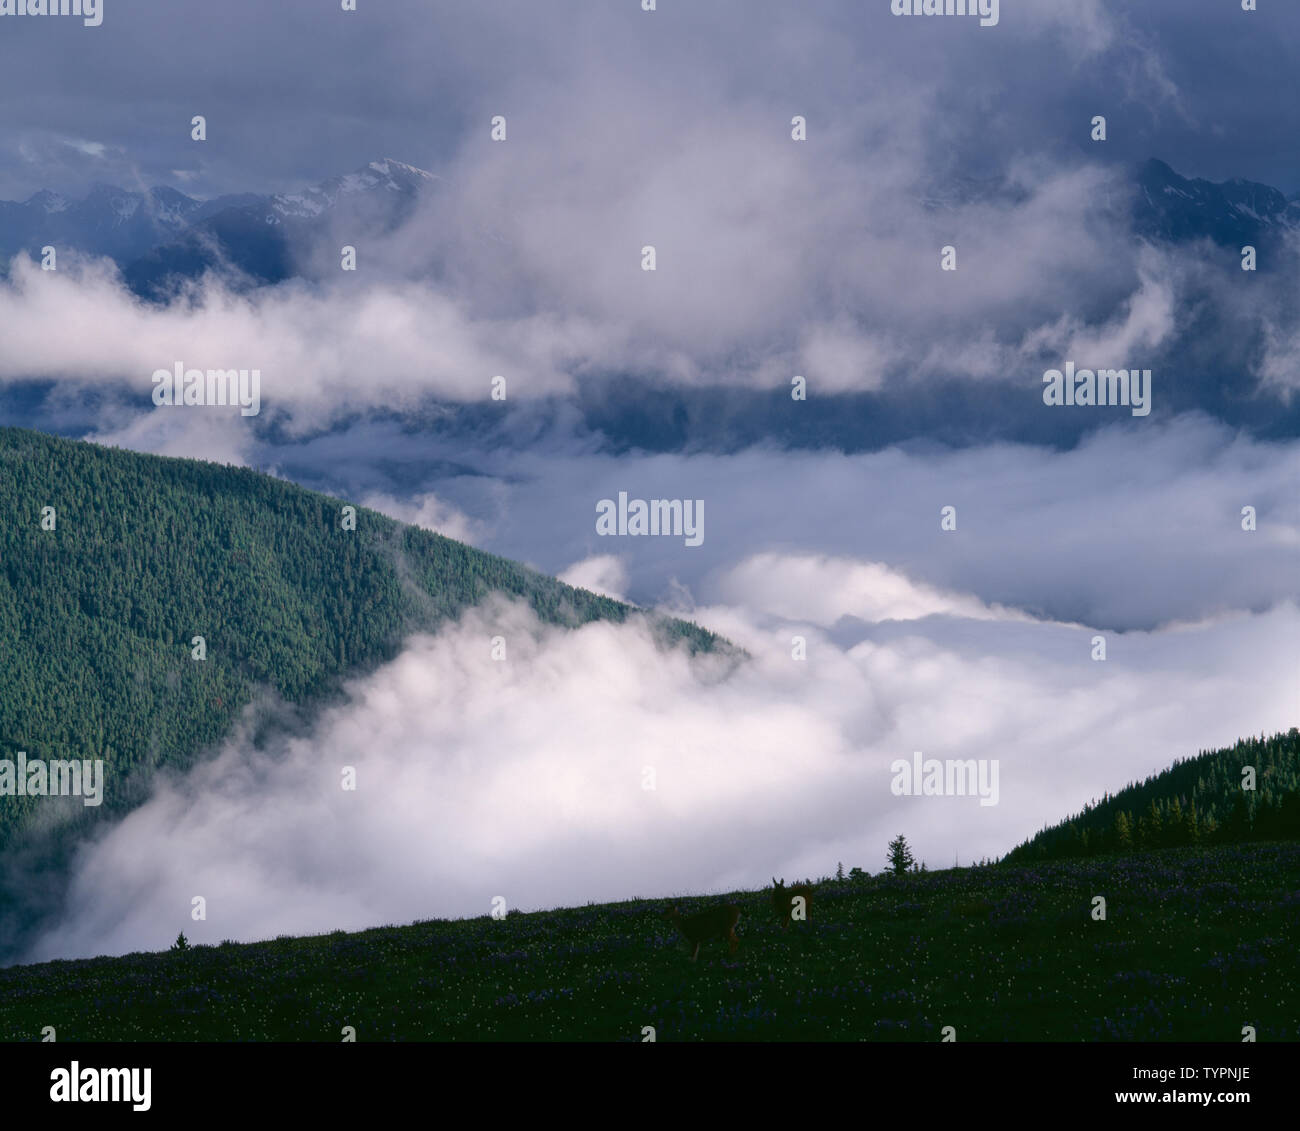 USA, Washington, Olympic National Park, Storm clouds hide peaks and forest in the Elwah Valley, view south from Hurricane Ridge. Stock Photo